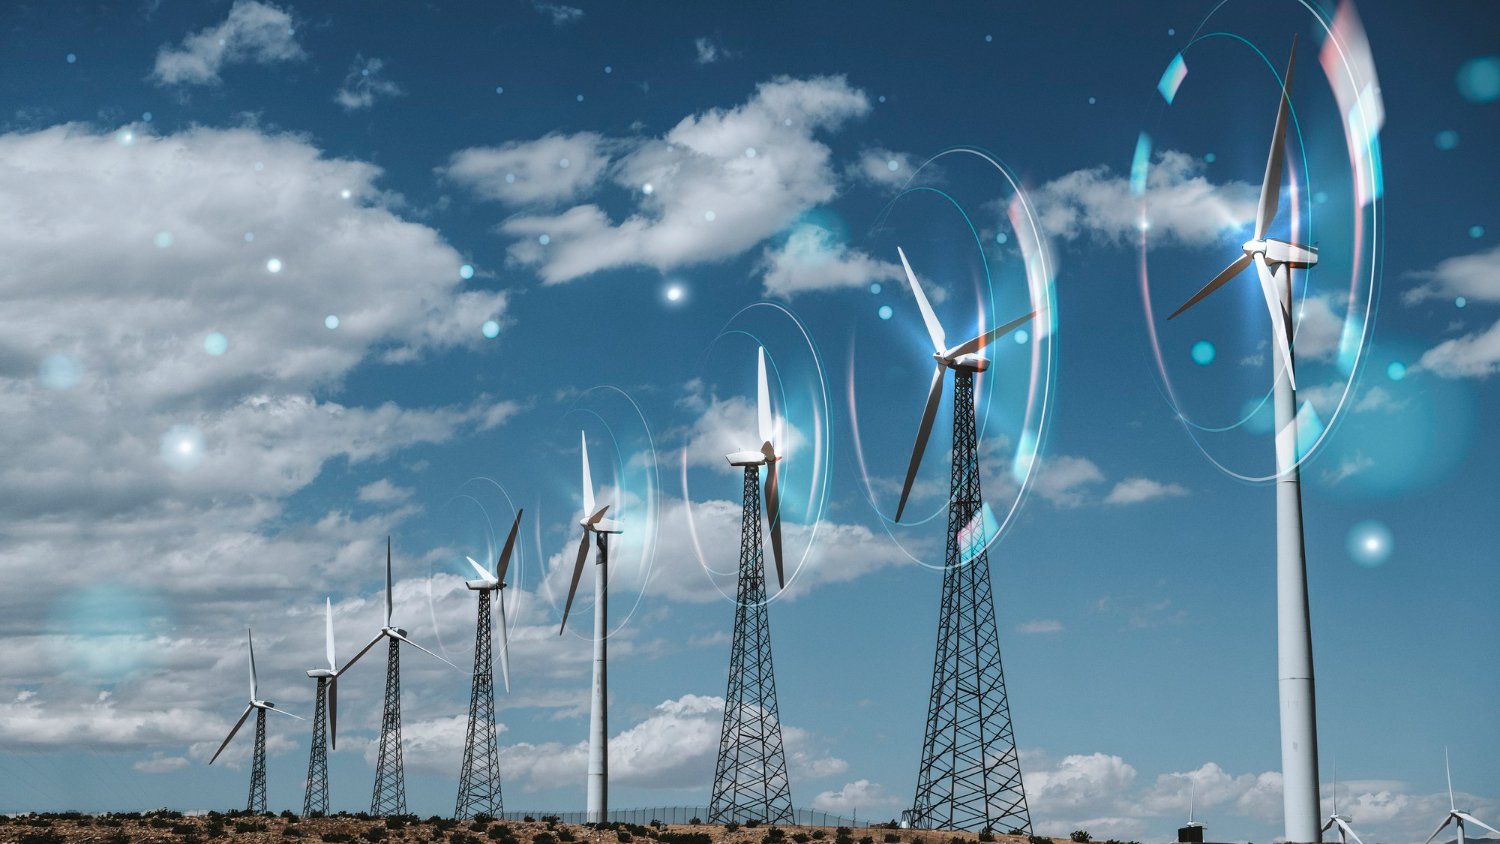 10 Interesting Facts About Wind Energy You Probably Didn’t Know